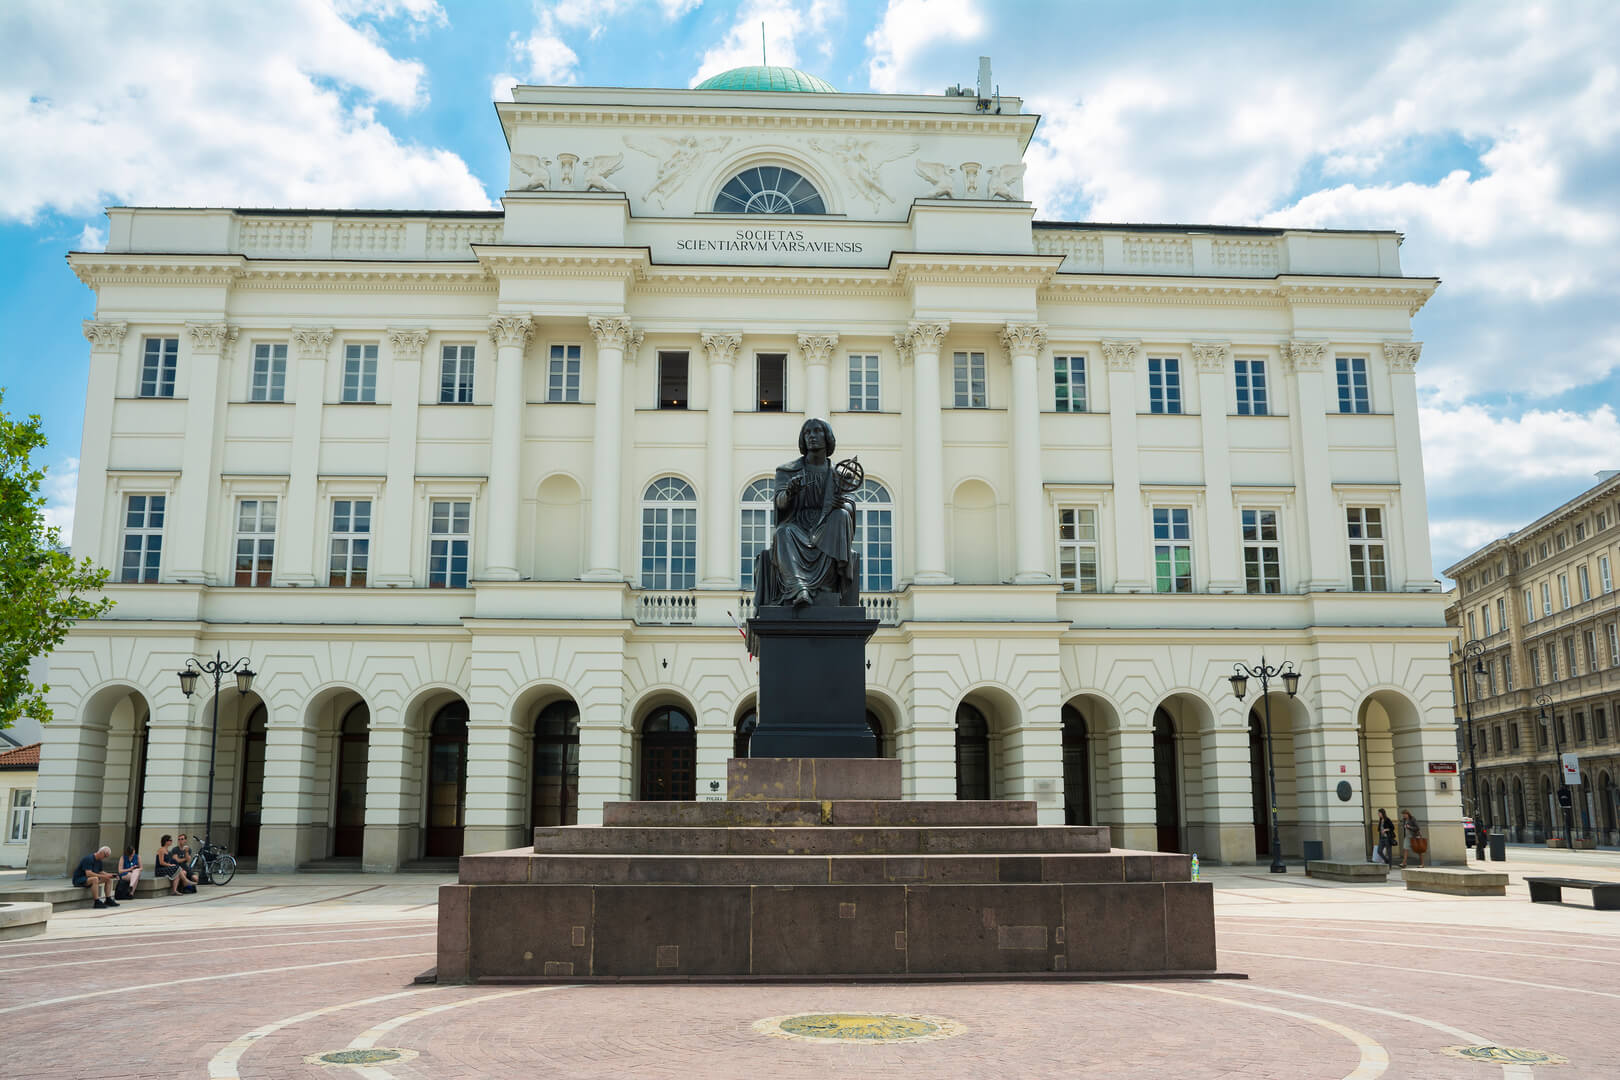 Staszic Palace. Copernicus Statue stands in front of Societas Scientiarum Varsoviensis or Polish Academy of Sciences in Warsaw , Poland